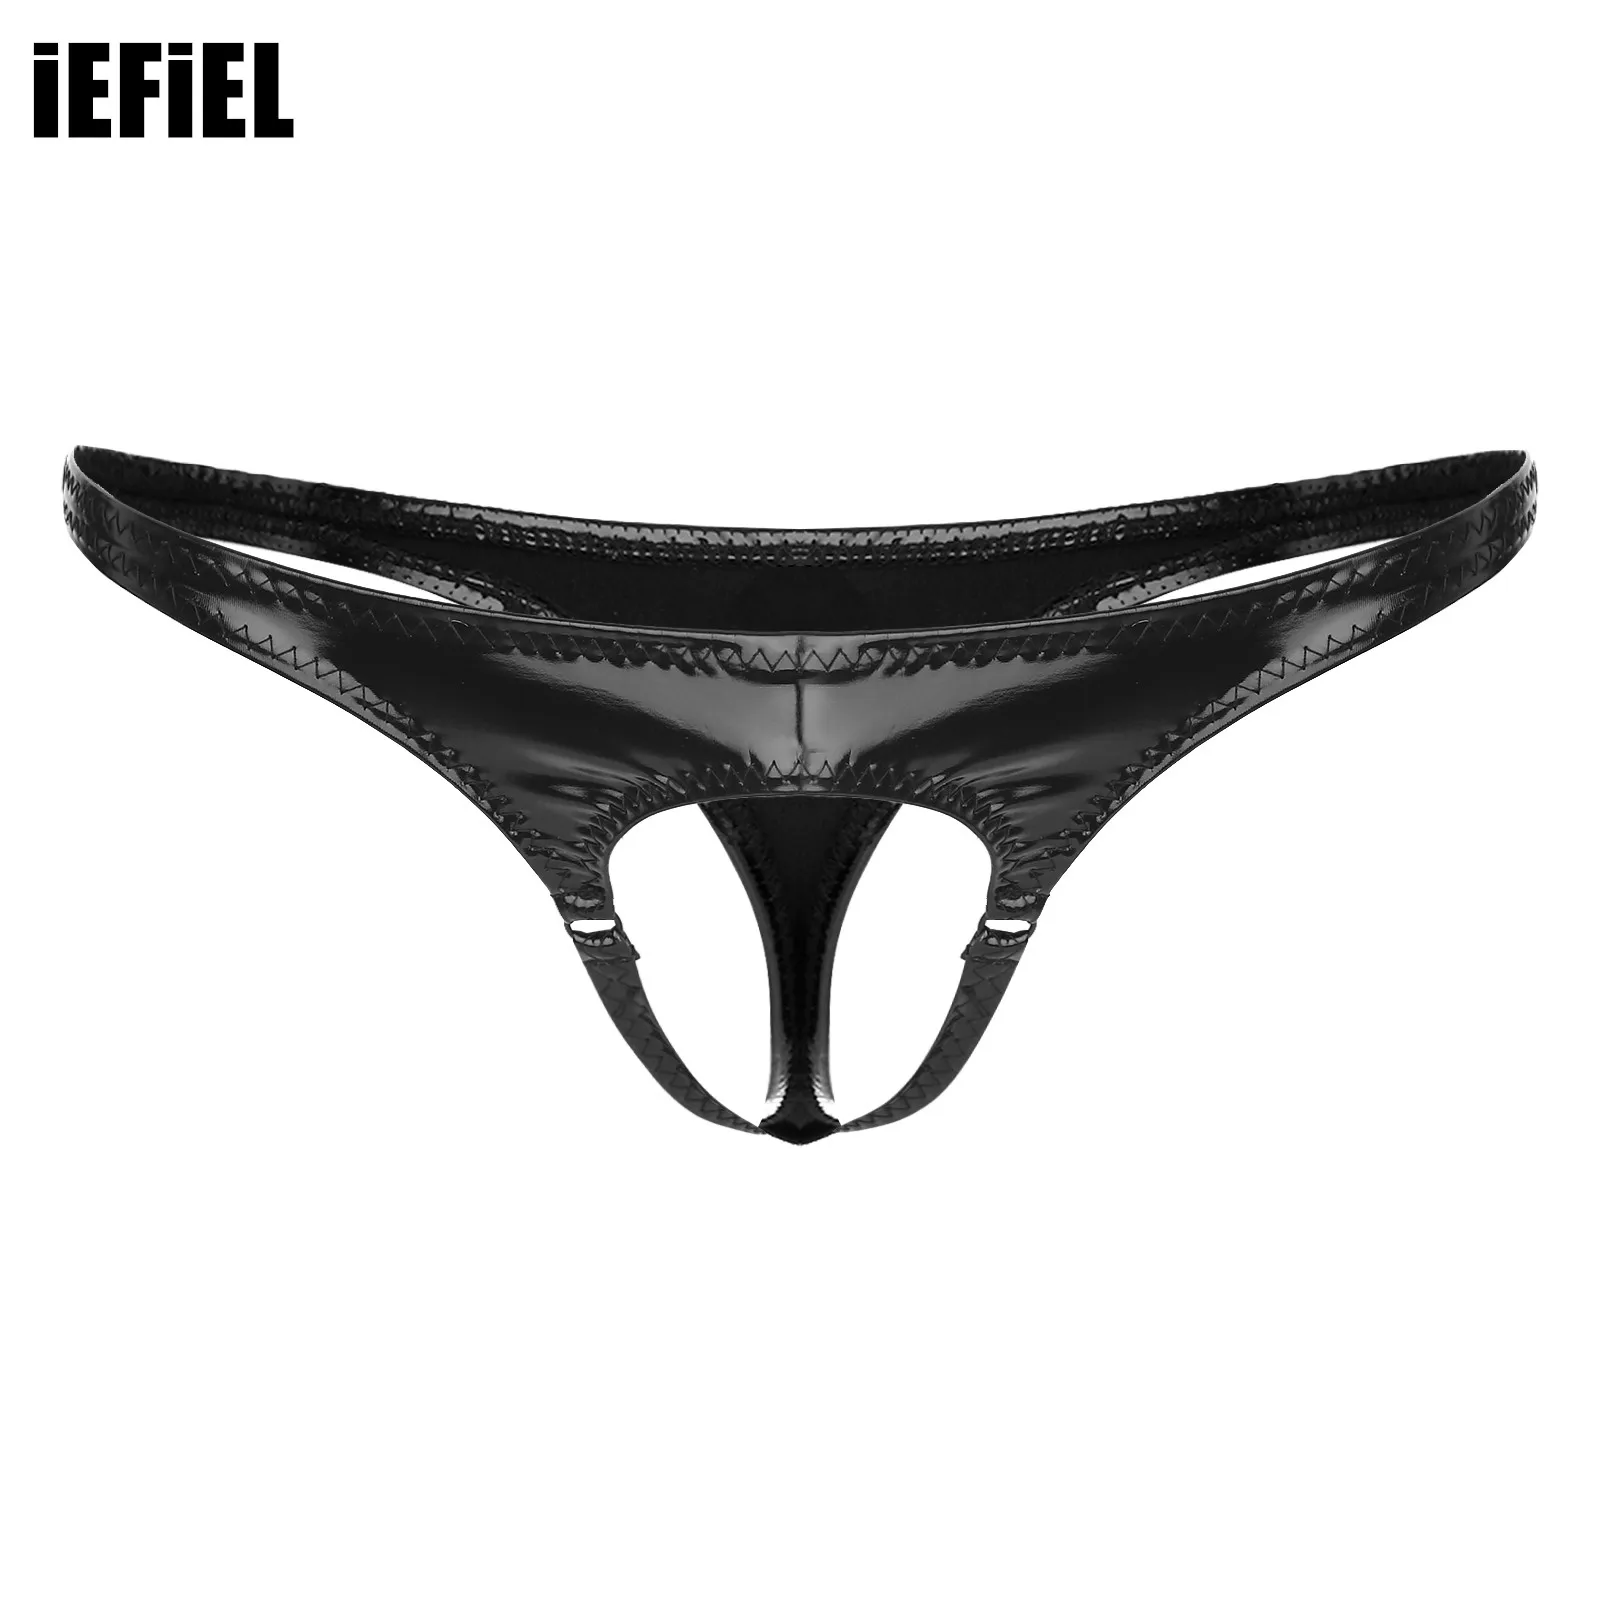 

Men Hollow Out Front Thong Wet Look Patent Leather G-String Underwear Low Rise Elastic Waistband T-back Underpants